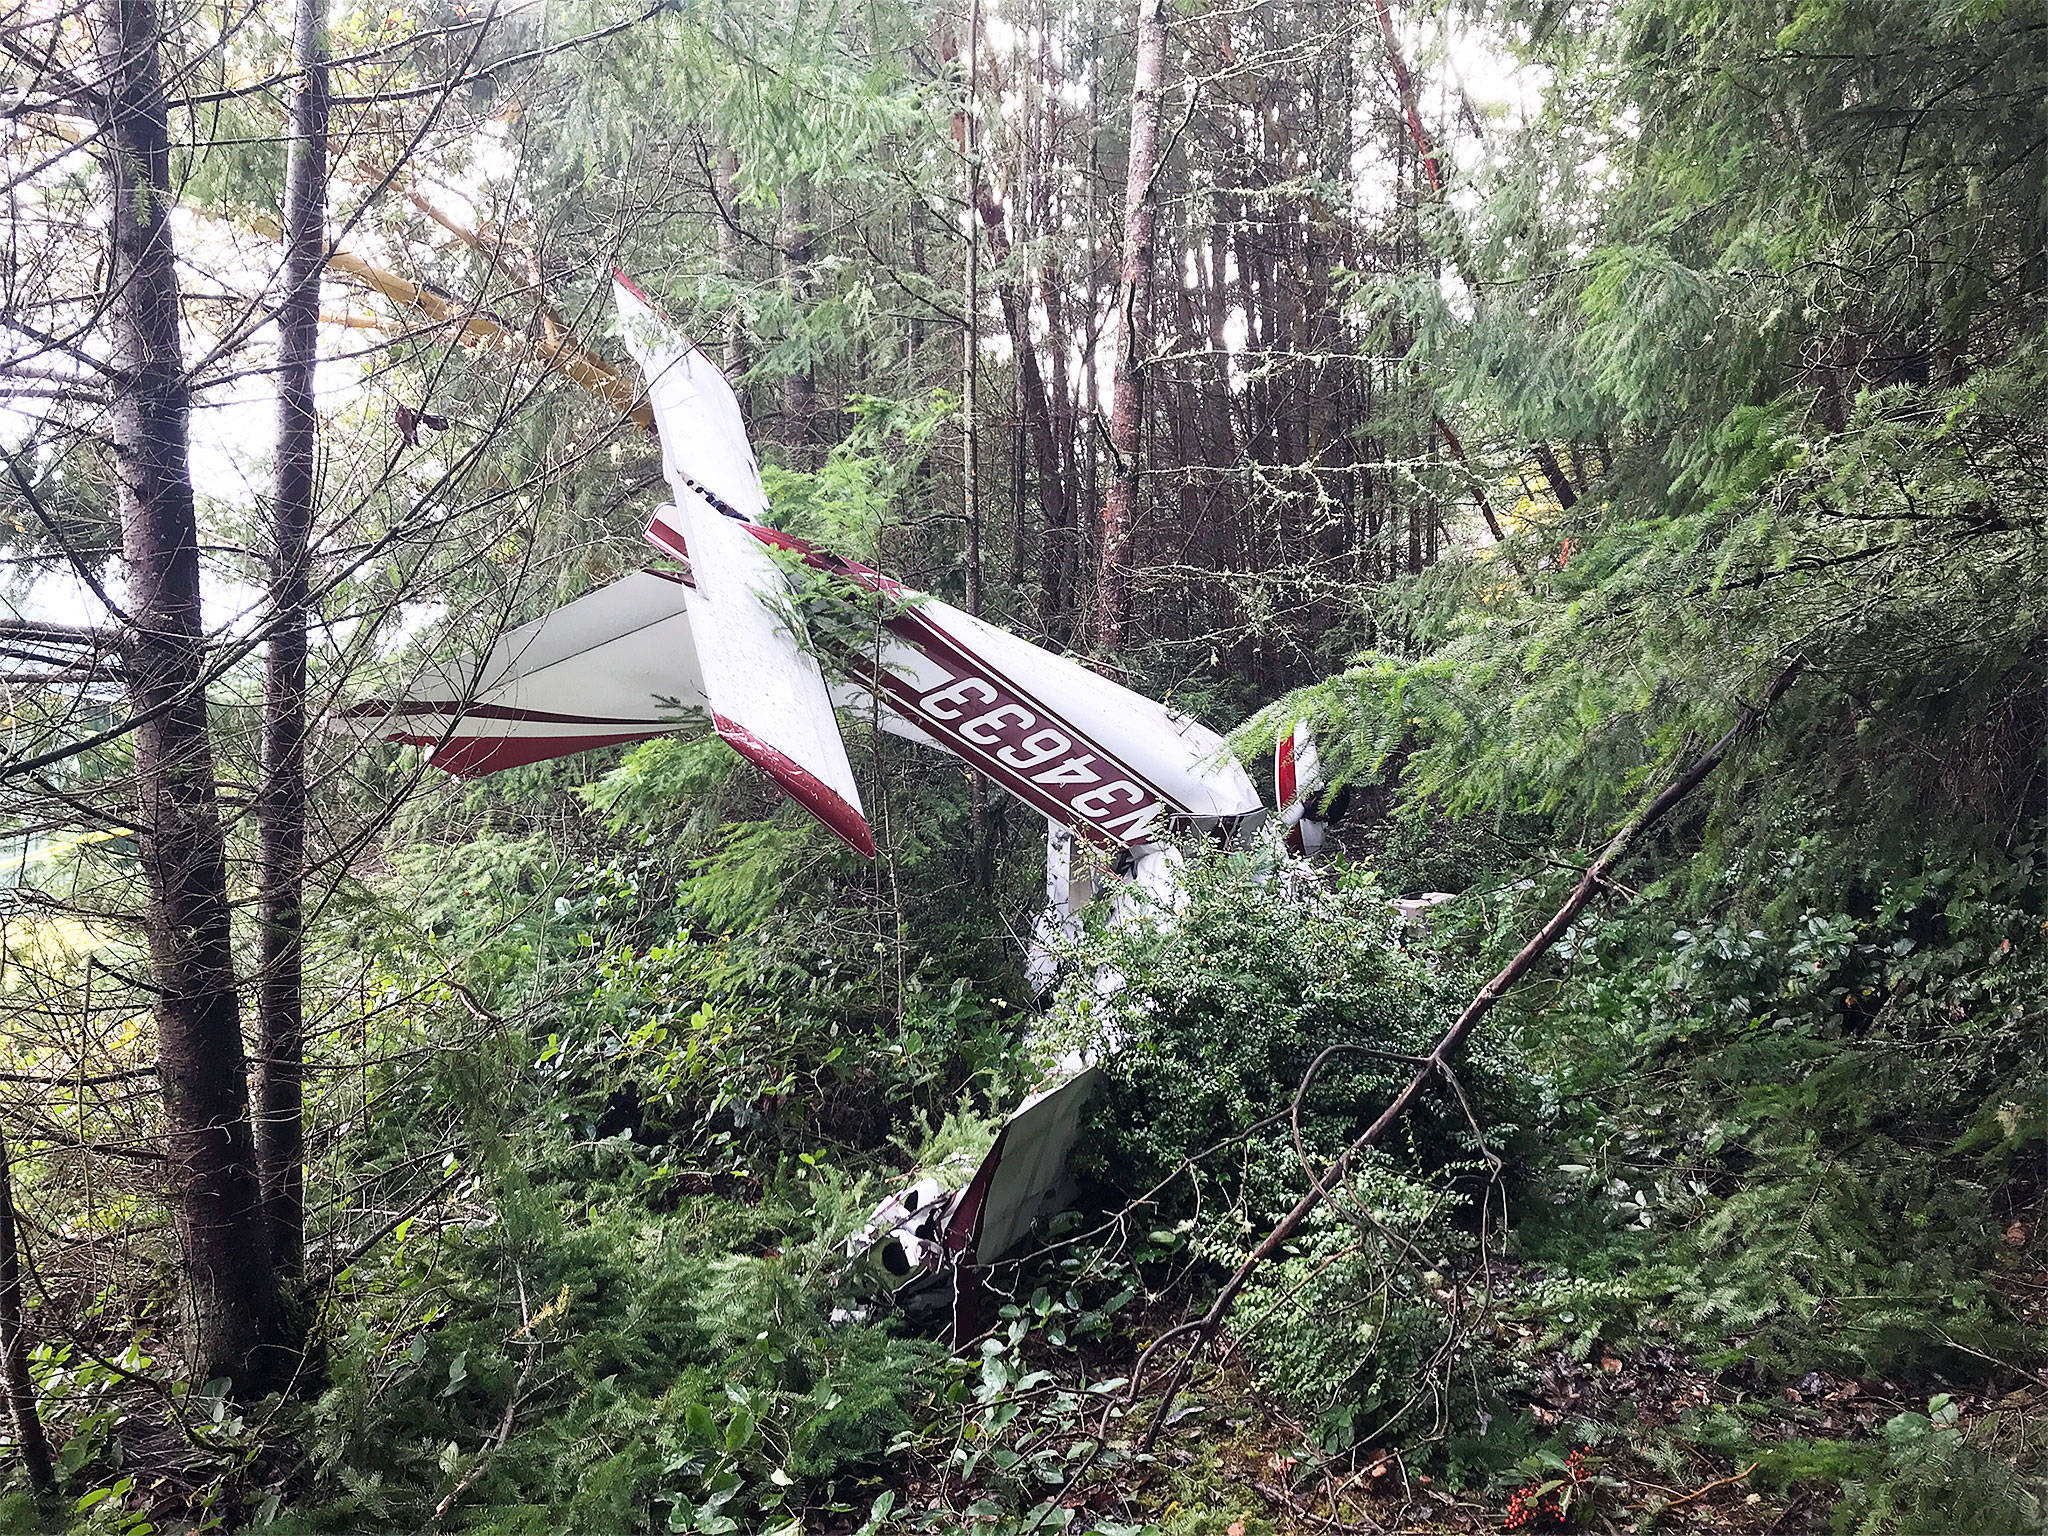 Two people were killed when A single-engine Cessna 177 Cardinal airplane crashed at the Whidbey Airpark near Langley Nov. 11, according to the FAA. Photo provided by Island County Sheriff’s Office.